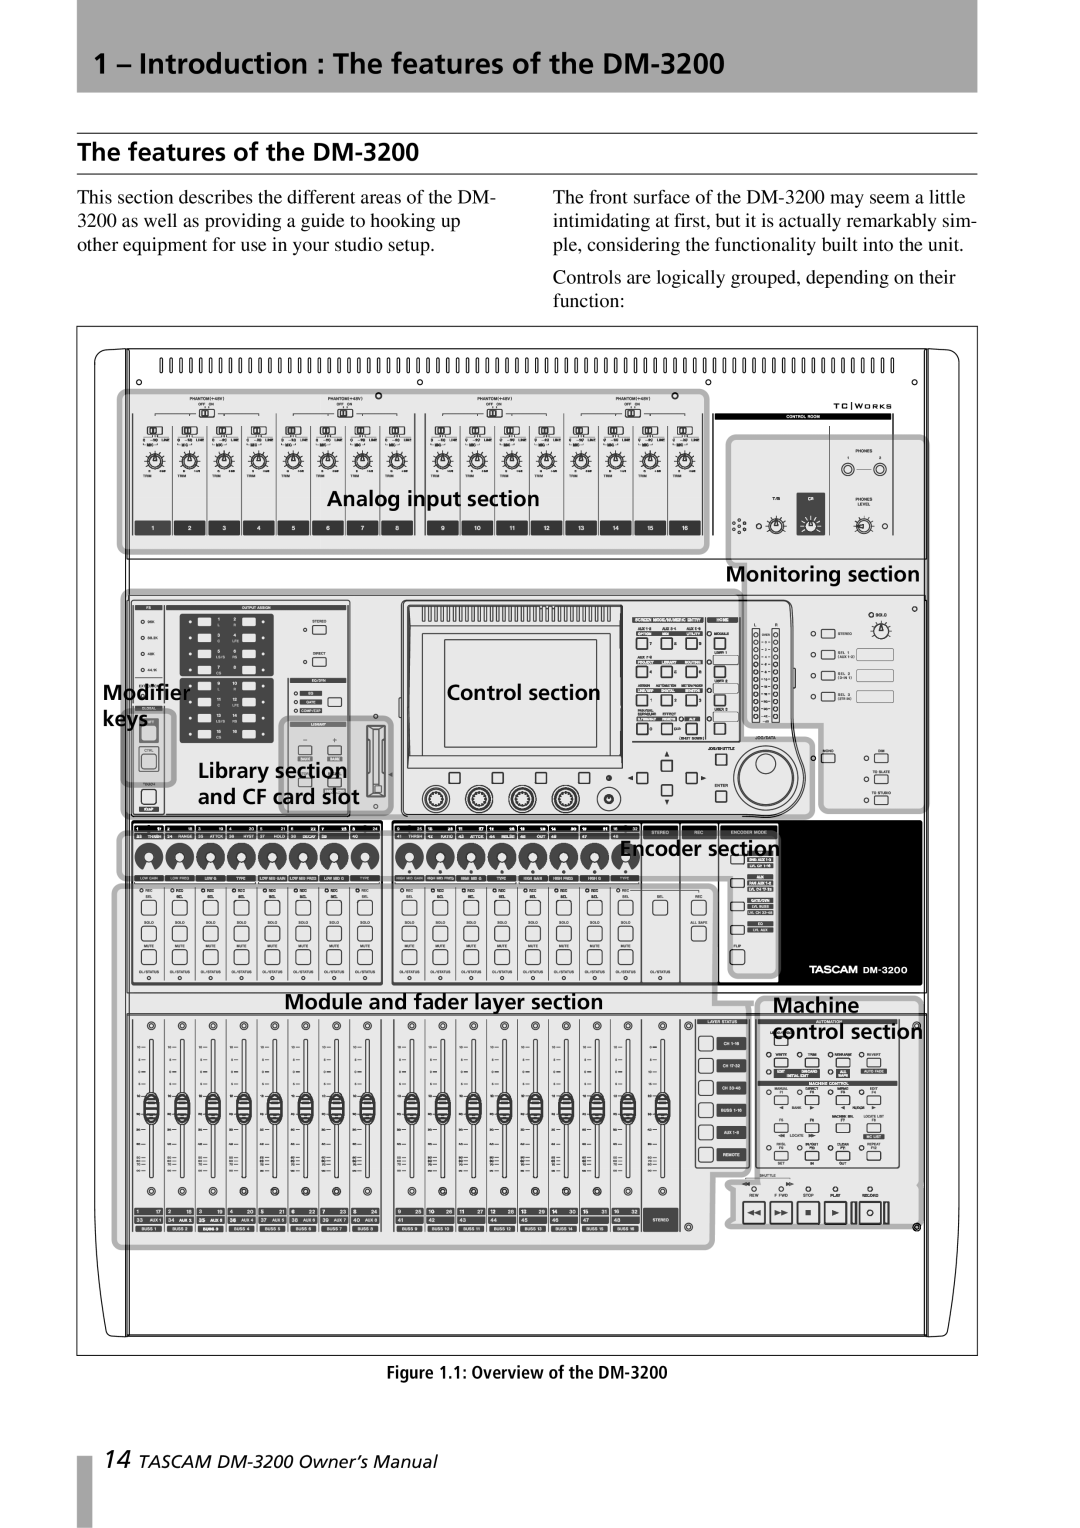 Tascam 1 – Introduction : The features of the DM-3200, Analog input section, Monitoring section, Modifier, keys 